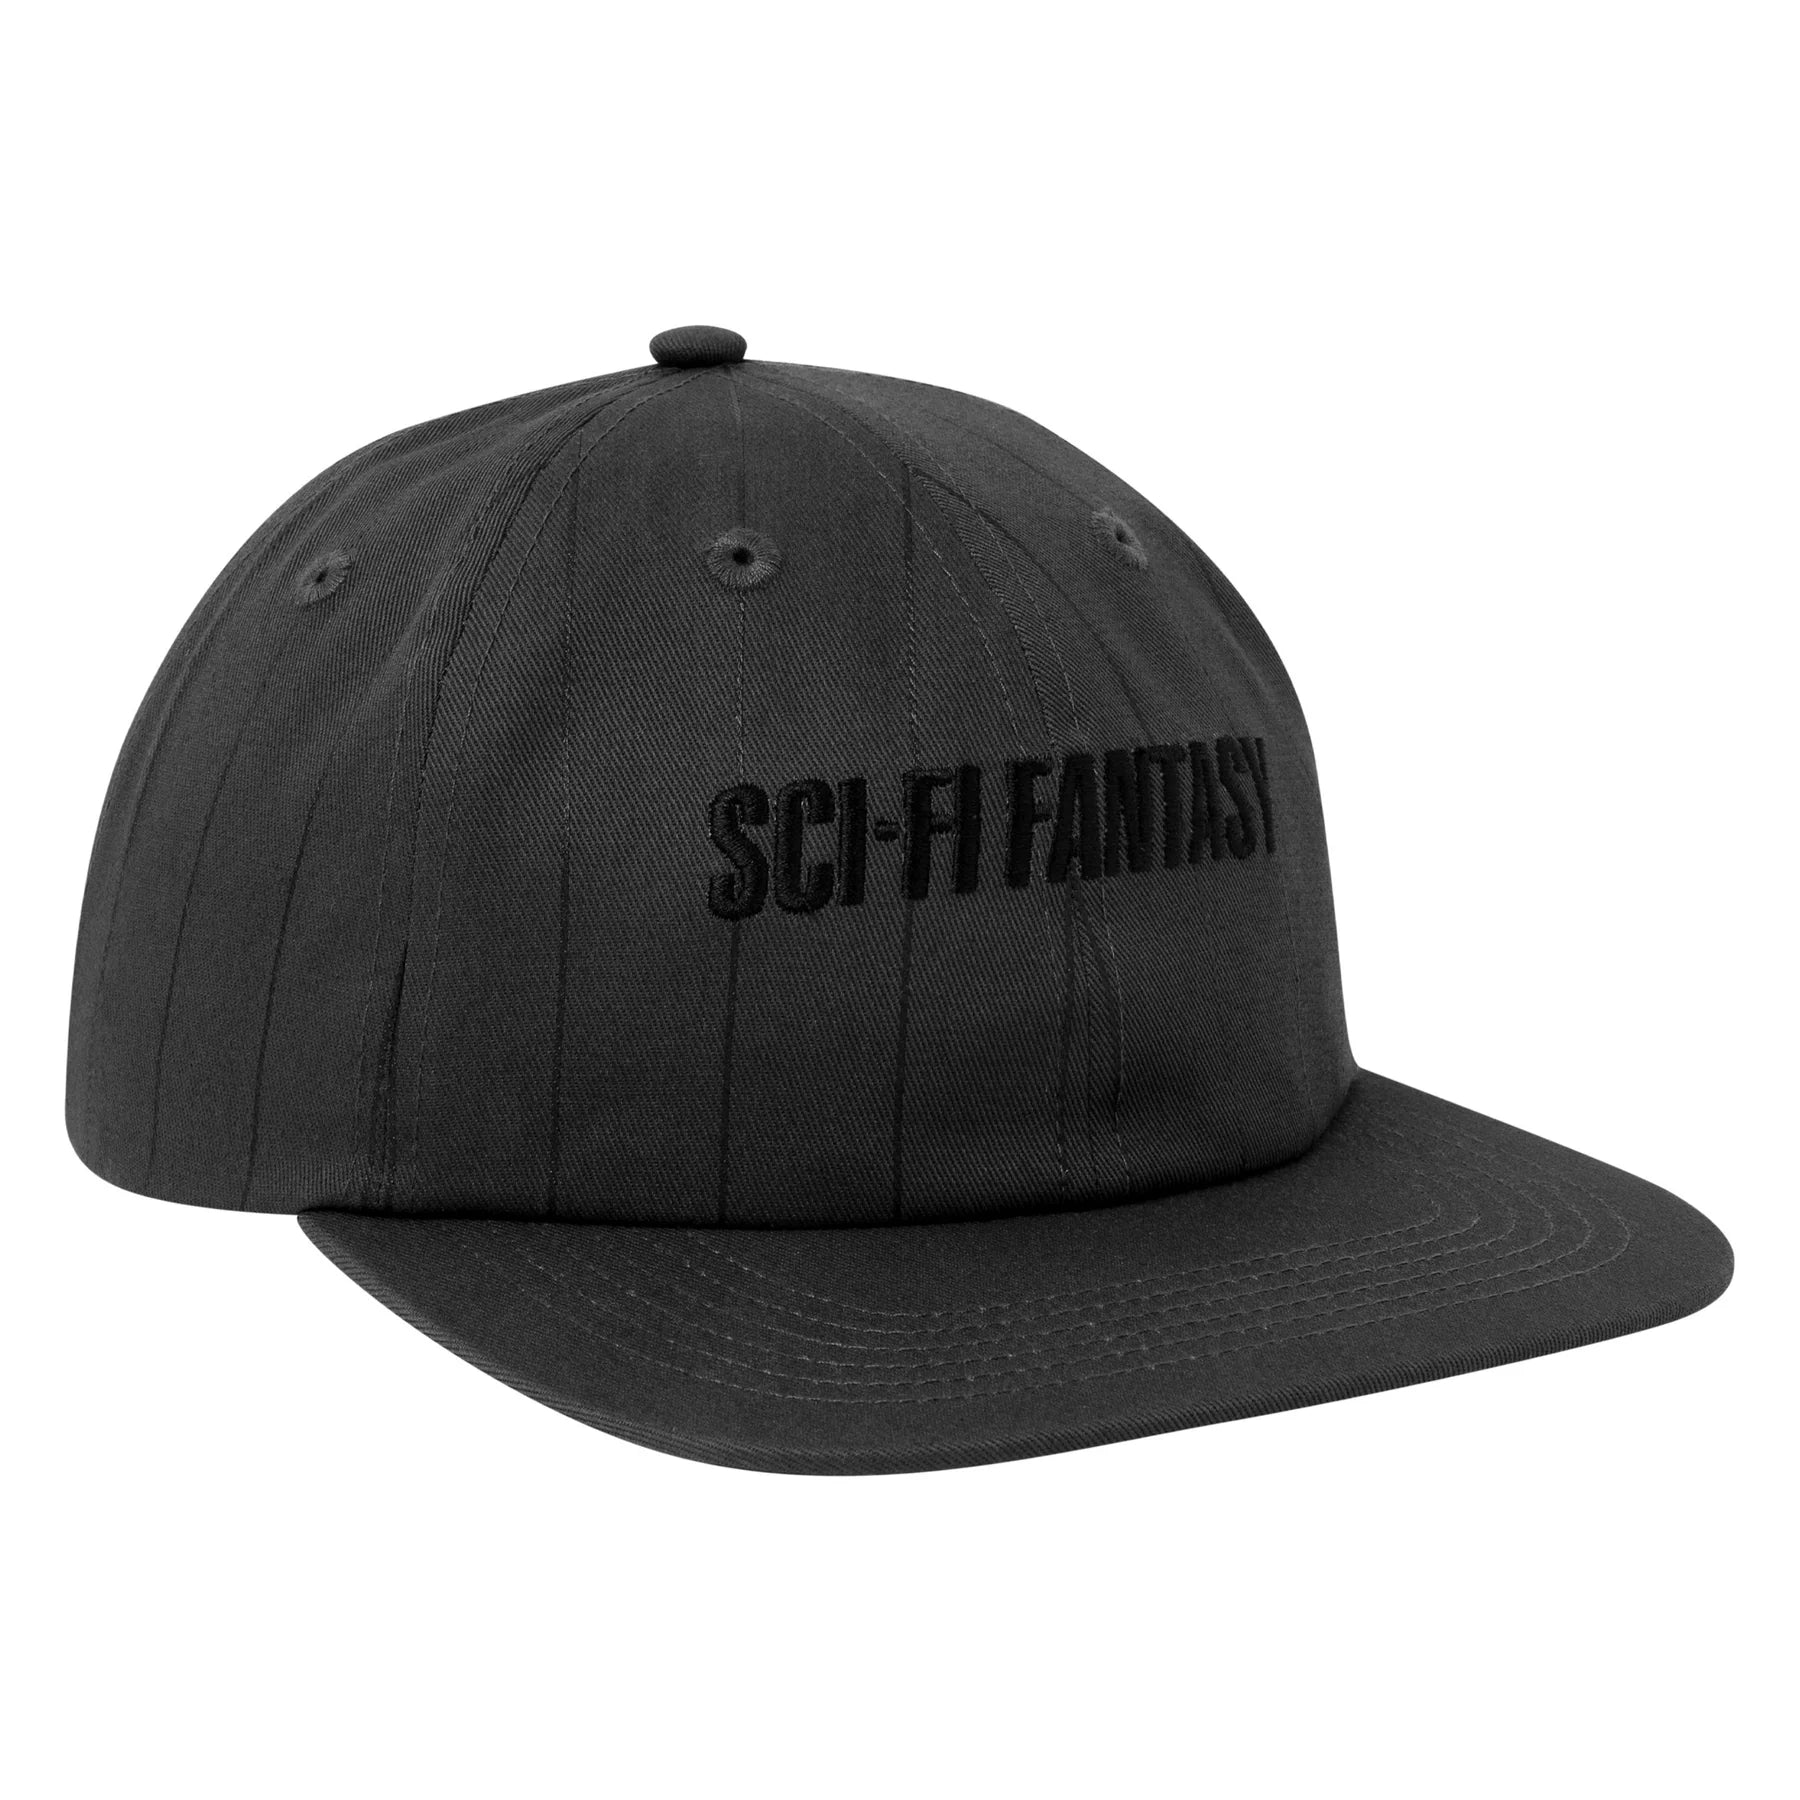 Dark grey sci fi fantasy six panel cap with black logo on front. Free uk shipping on orders over £50